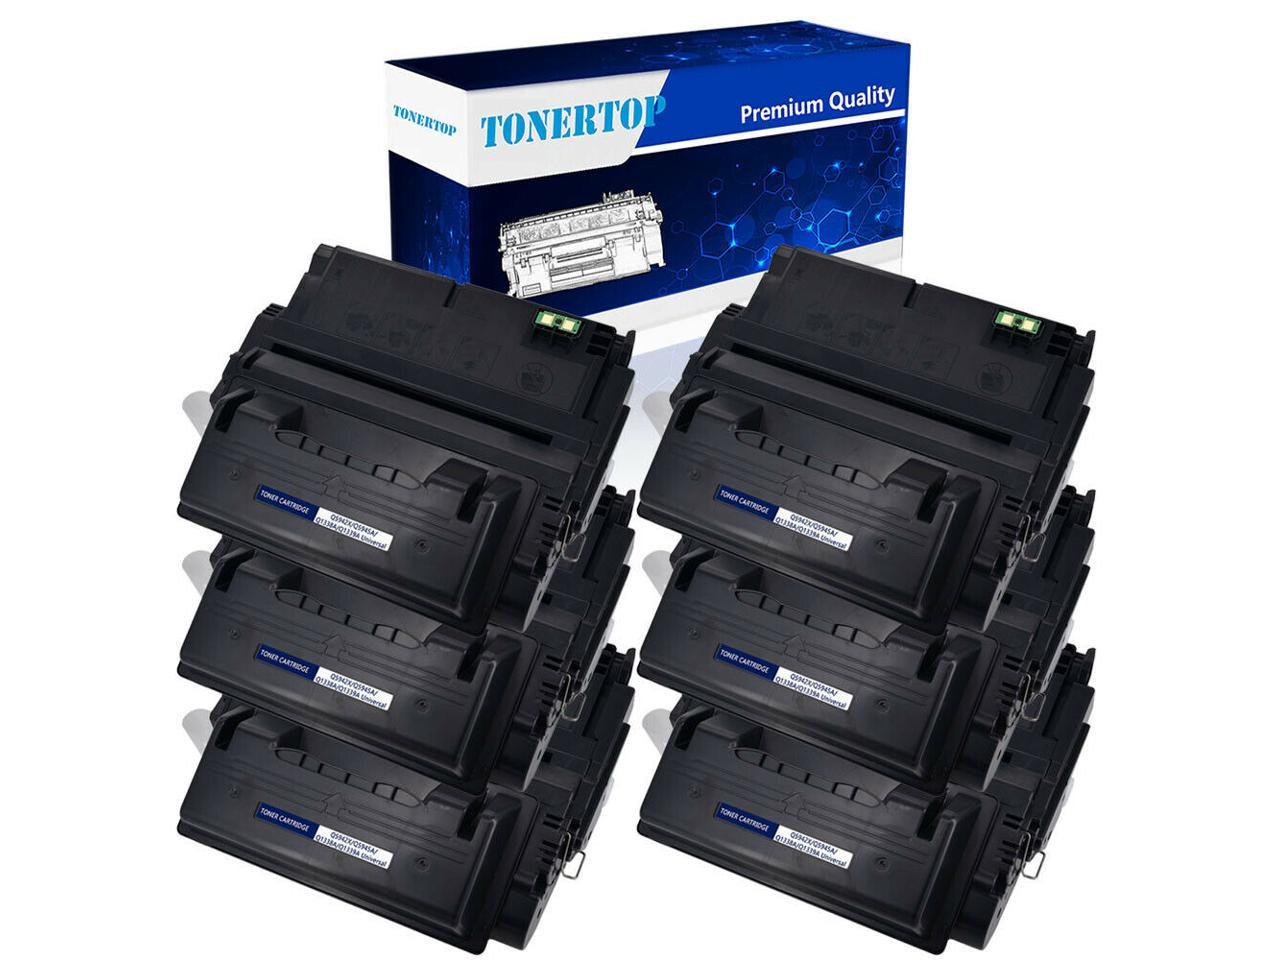 6 Pack High Yield Q1338A 38A Toner for HP LaserJet 4200 4200dtn 4200dtns Printer 